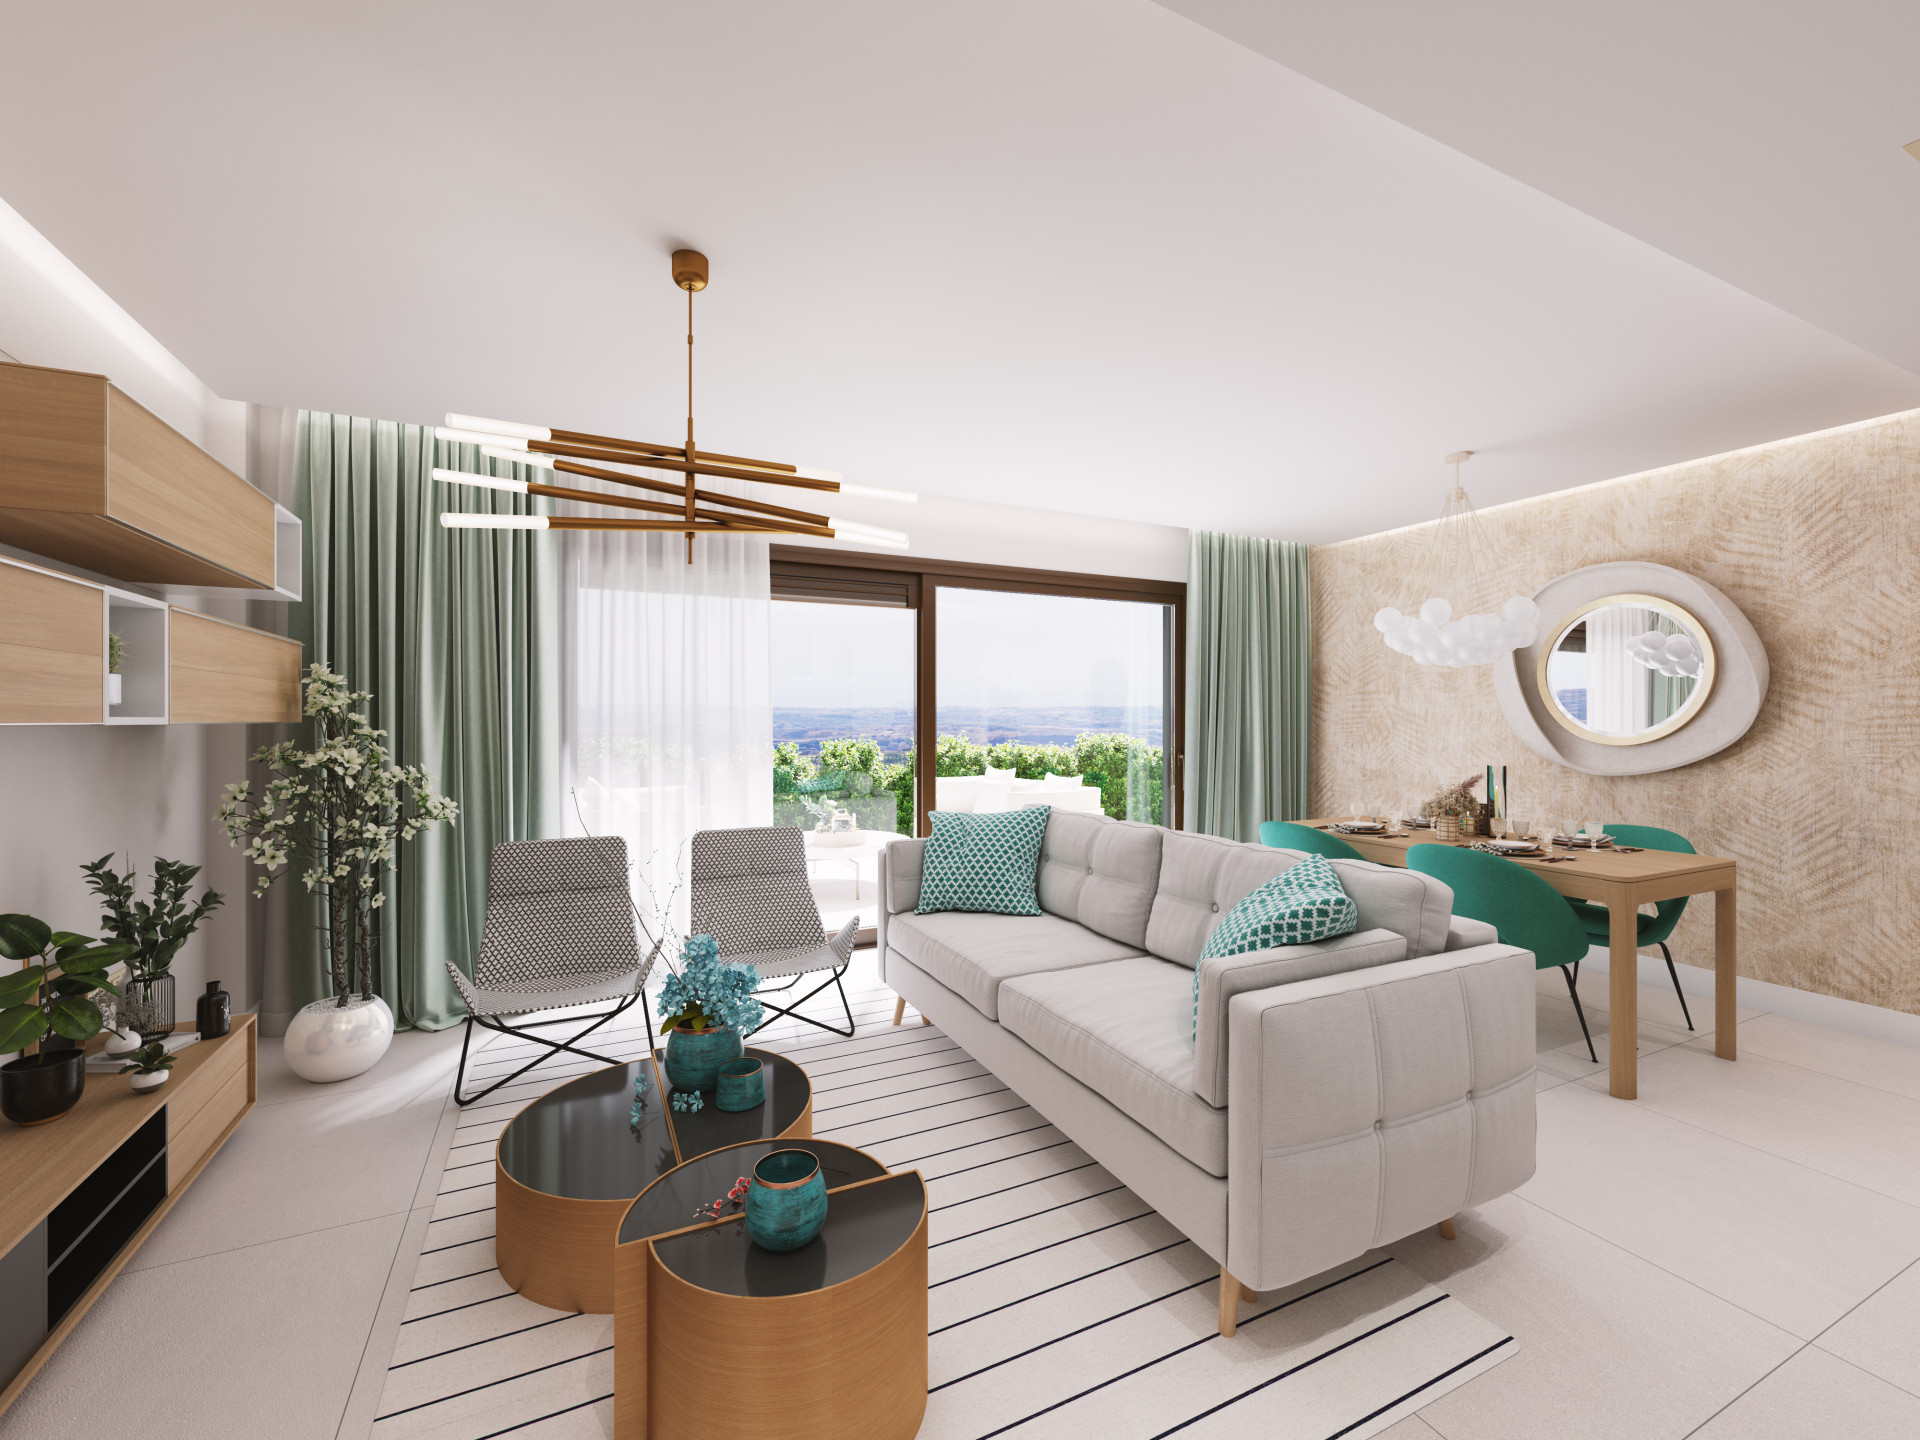 Almazara Hills: Apartments and Penthouses surrounded by nature and close to Marbella | Image 13